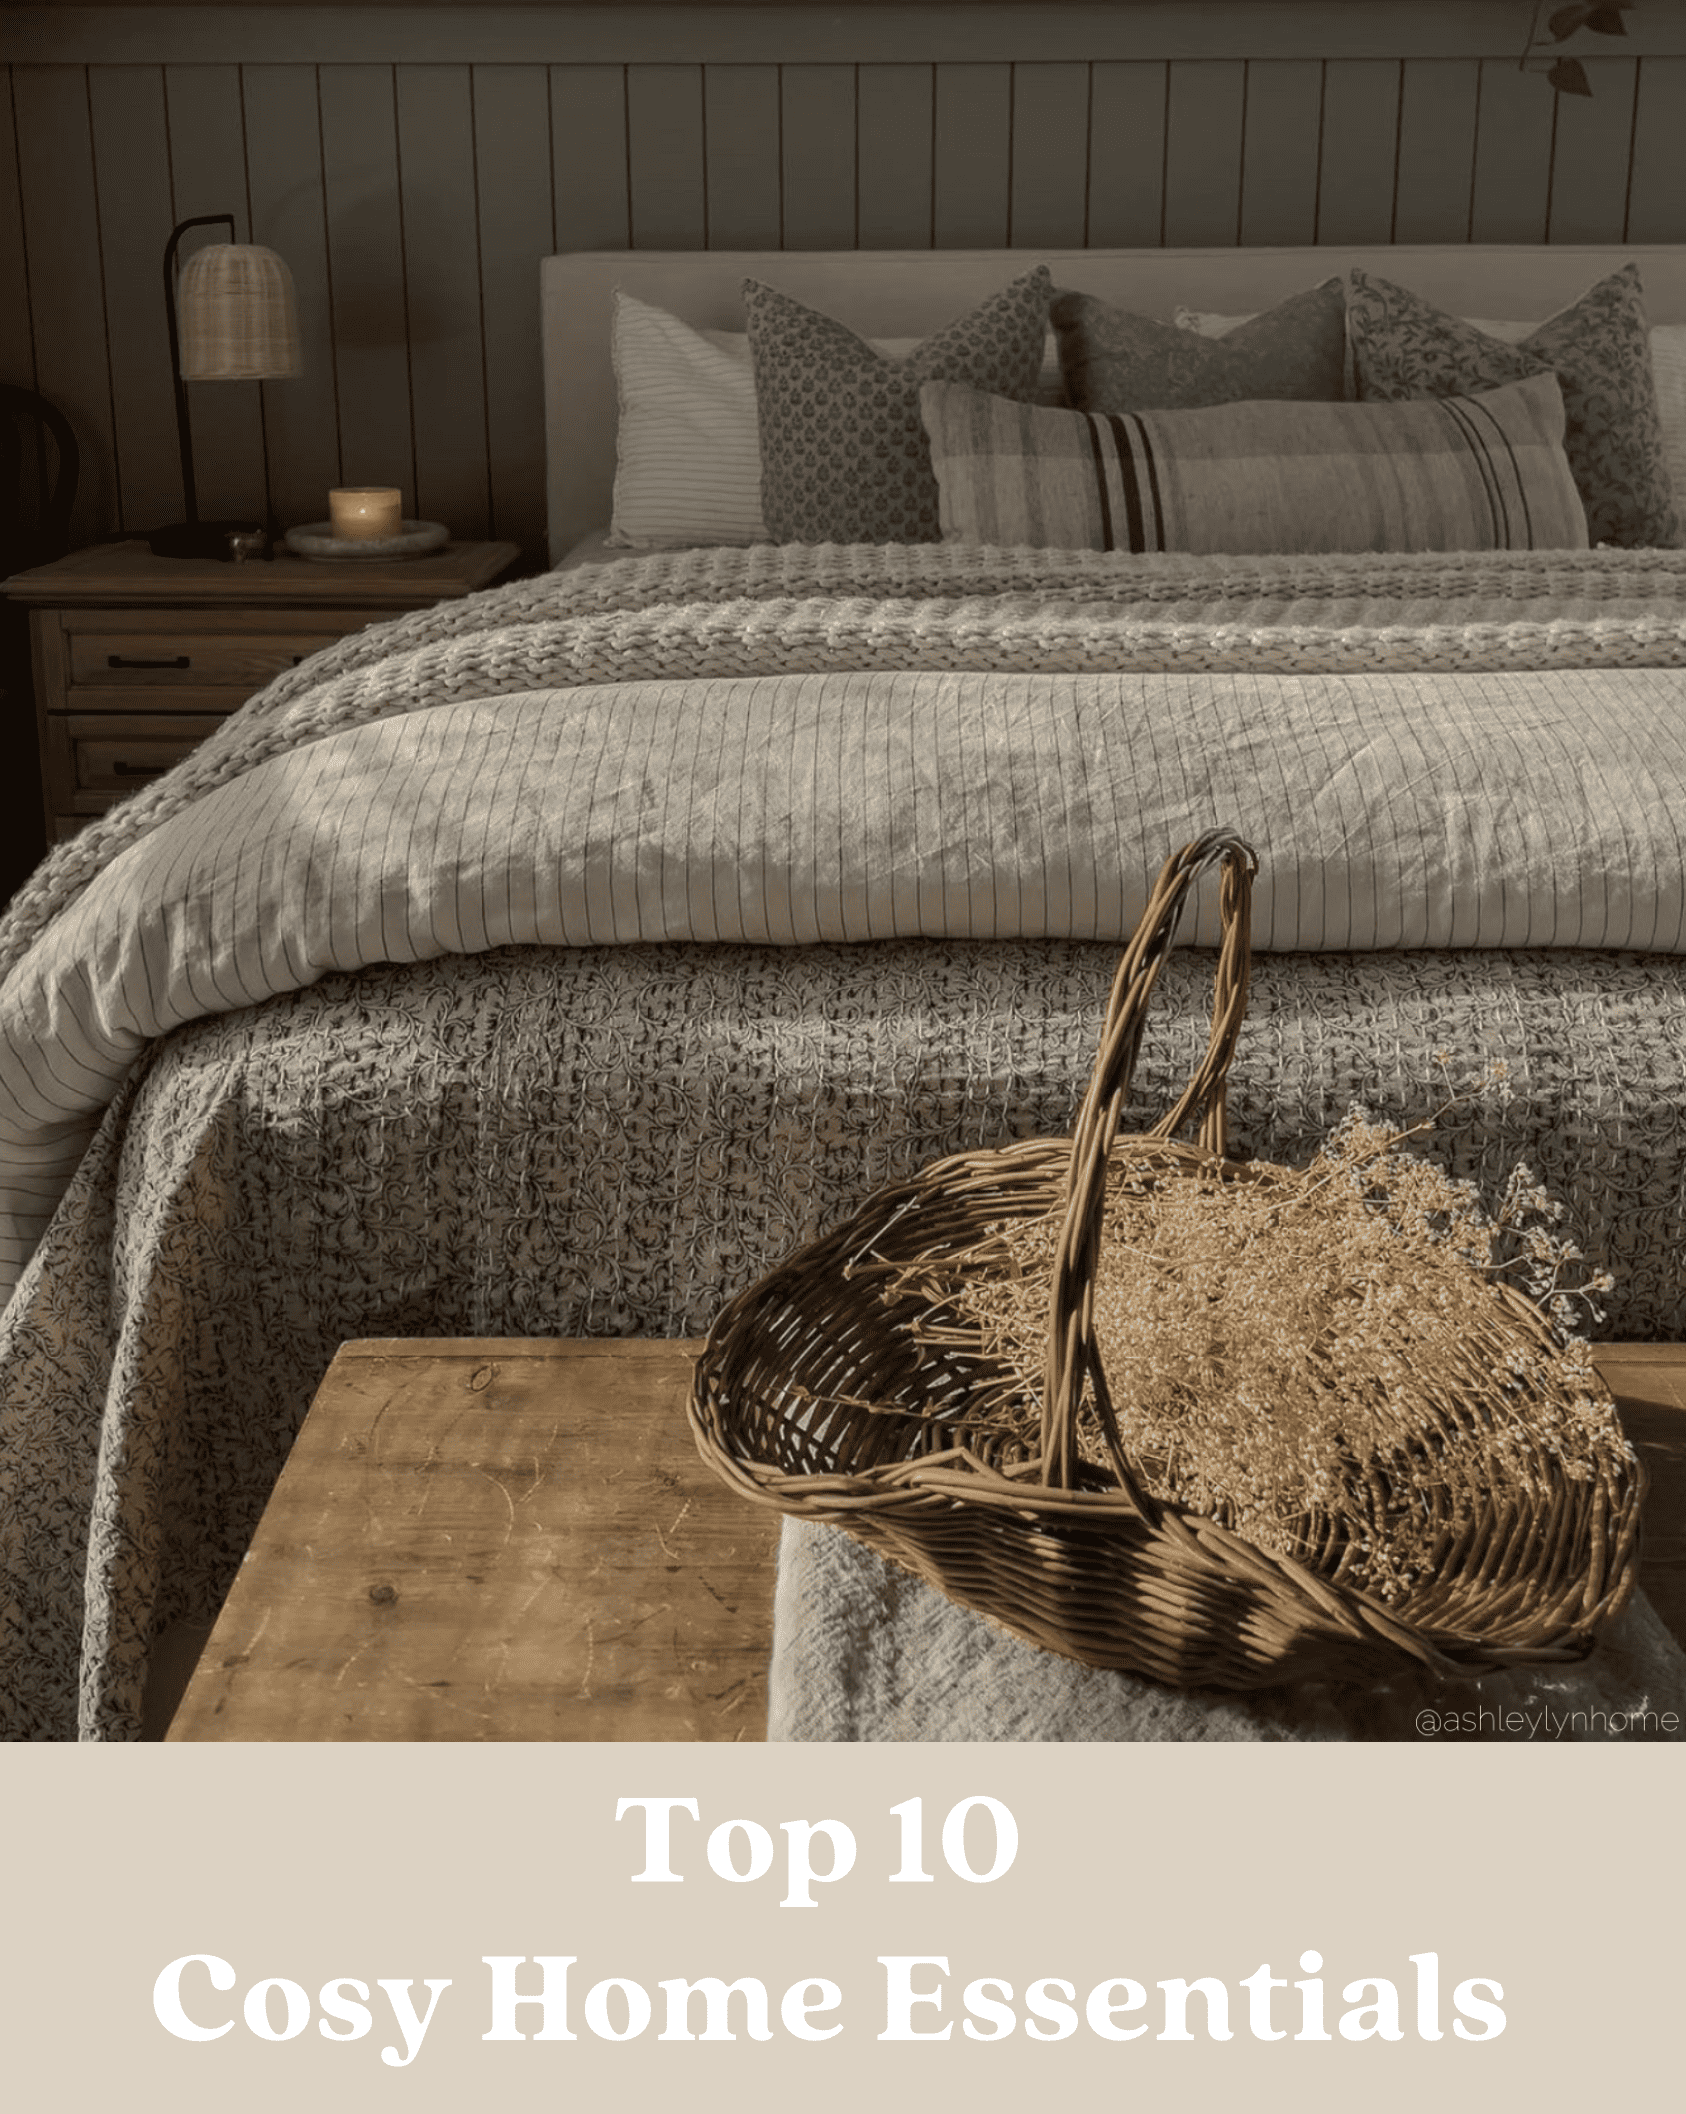 A blog about our top 10 essentials for a cosy home.